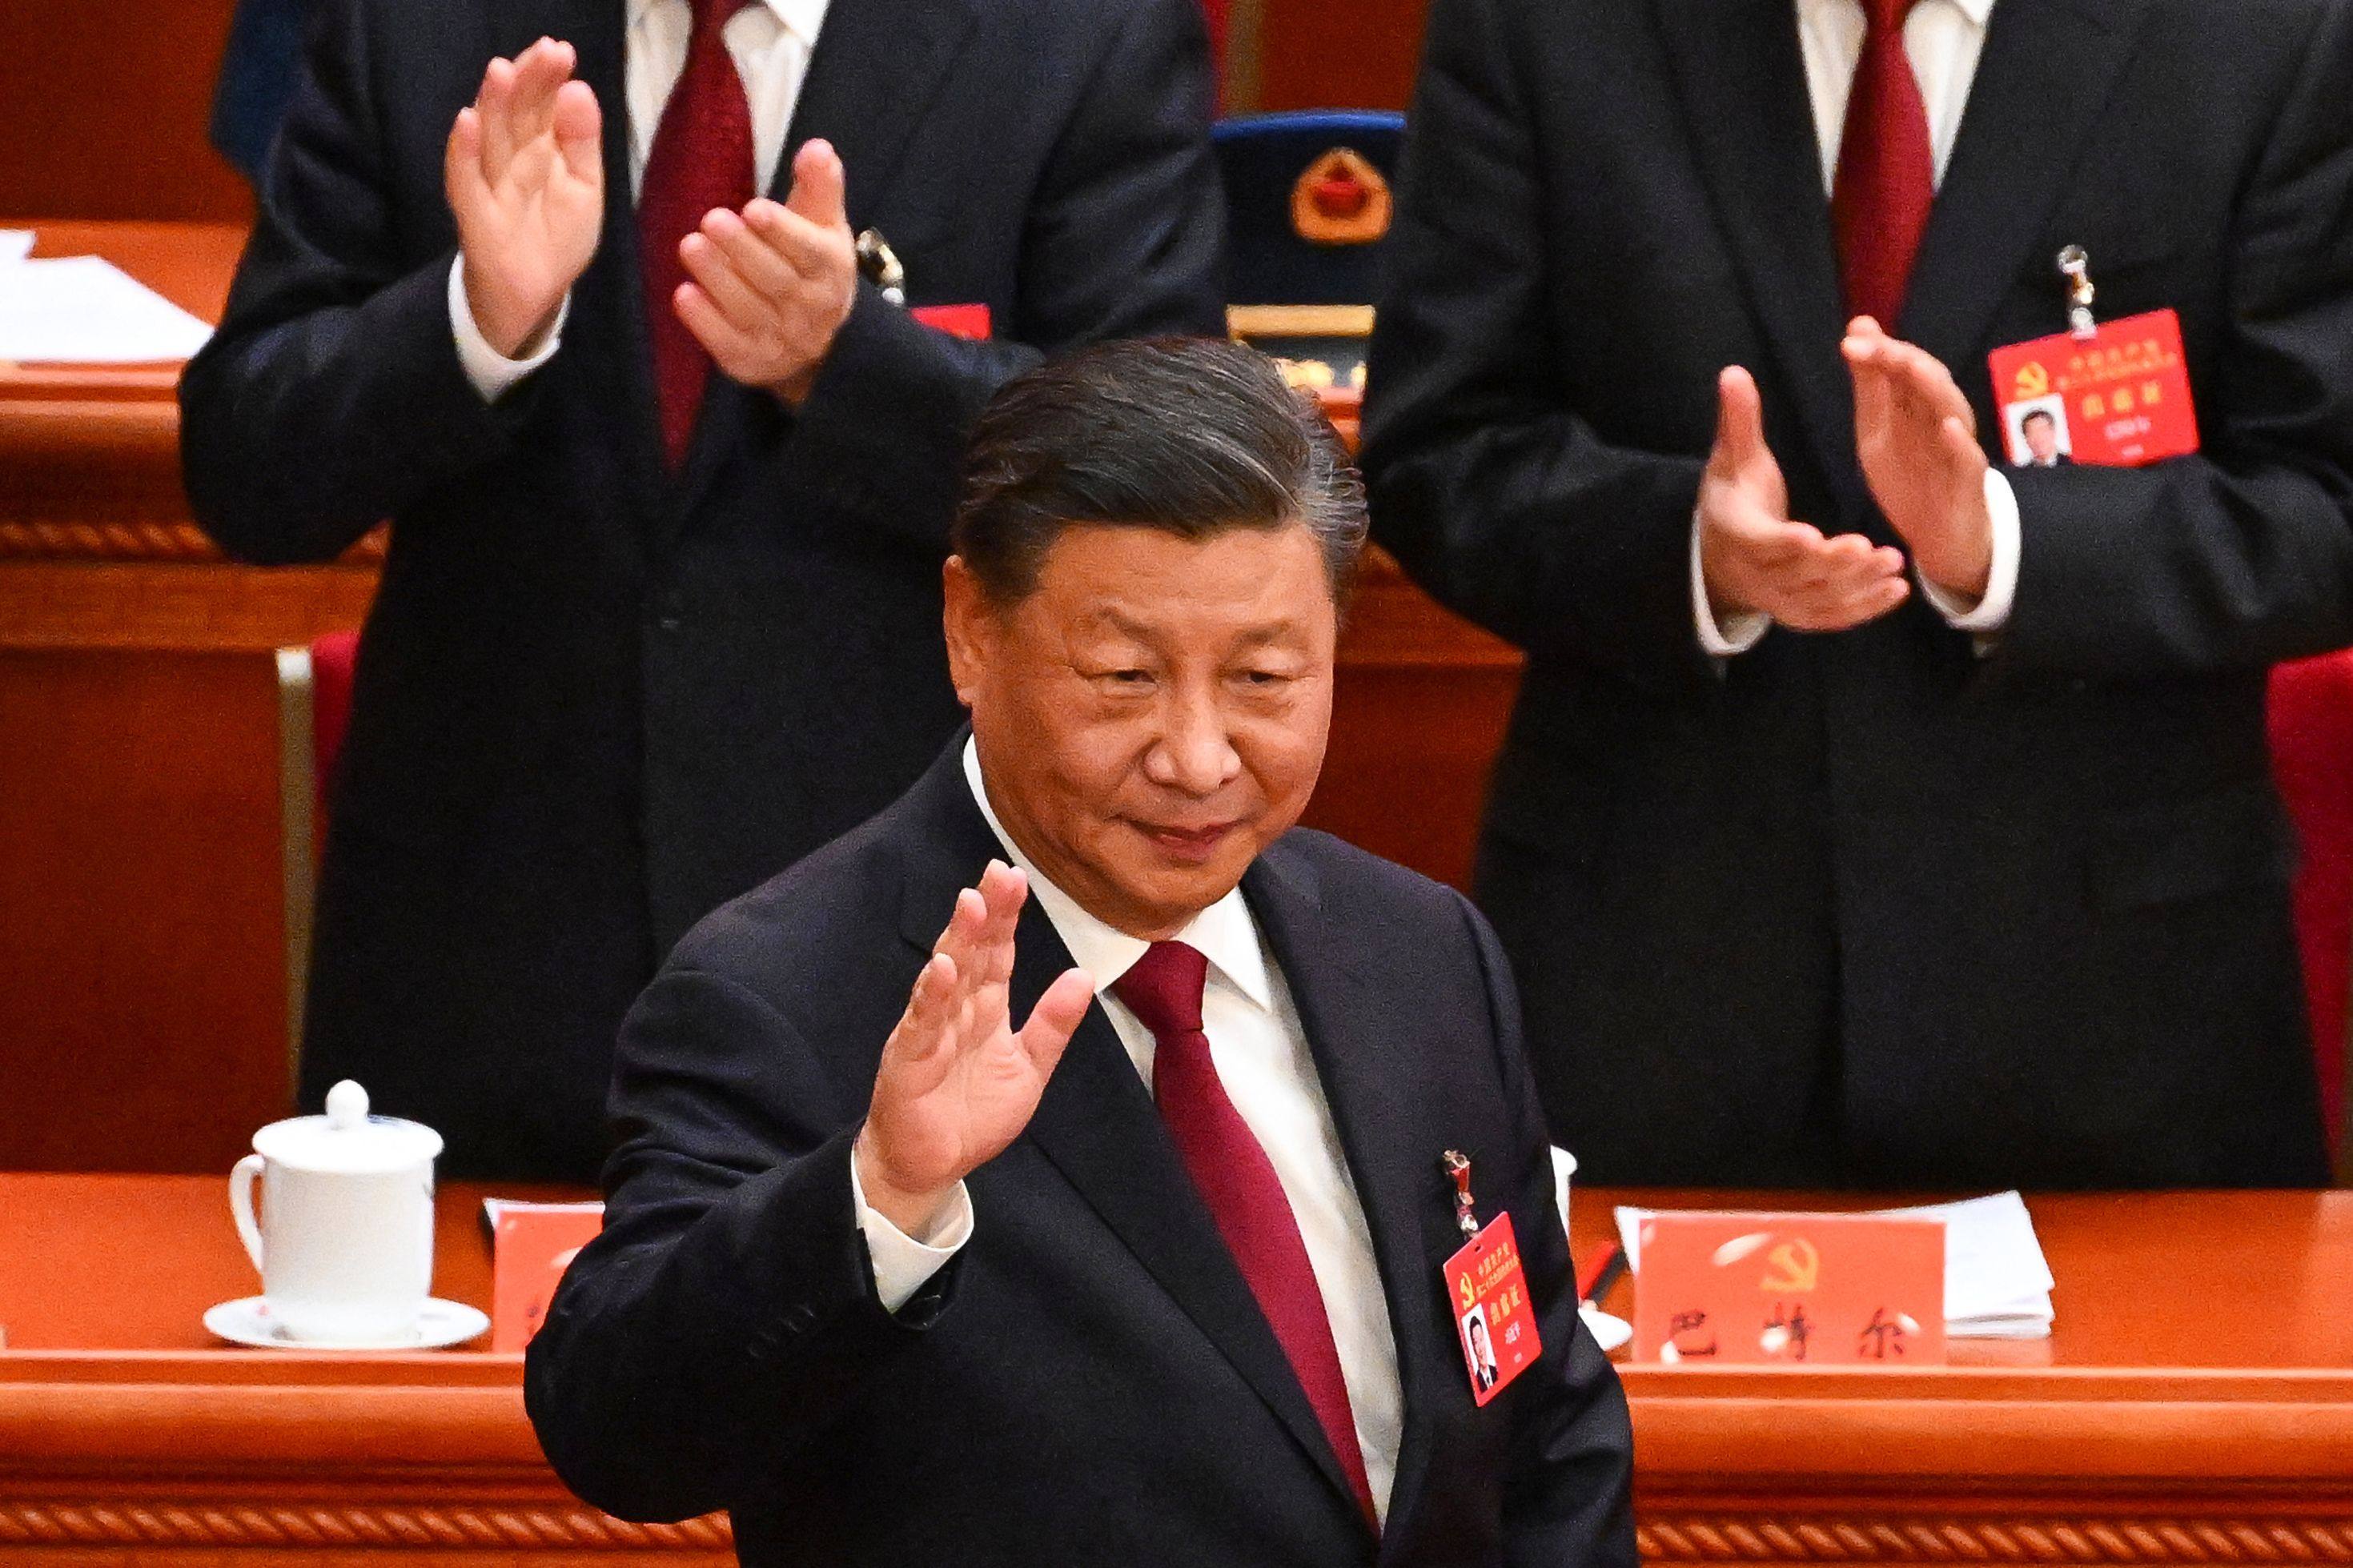 Chinese President Xi Jinping arrives for the opening session of the 20th Communist Party congress at the Great Hall of the People in Beijing on Sunday. Photo: AFP